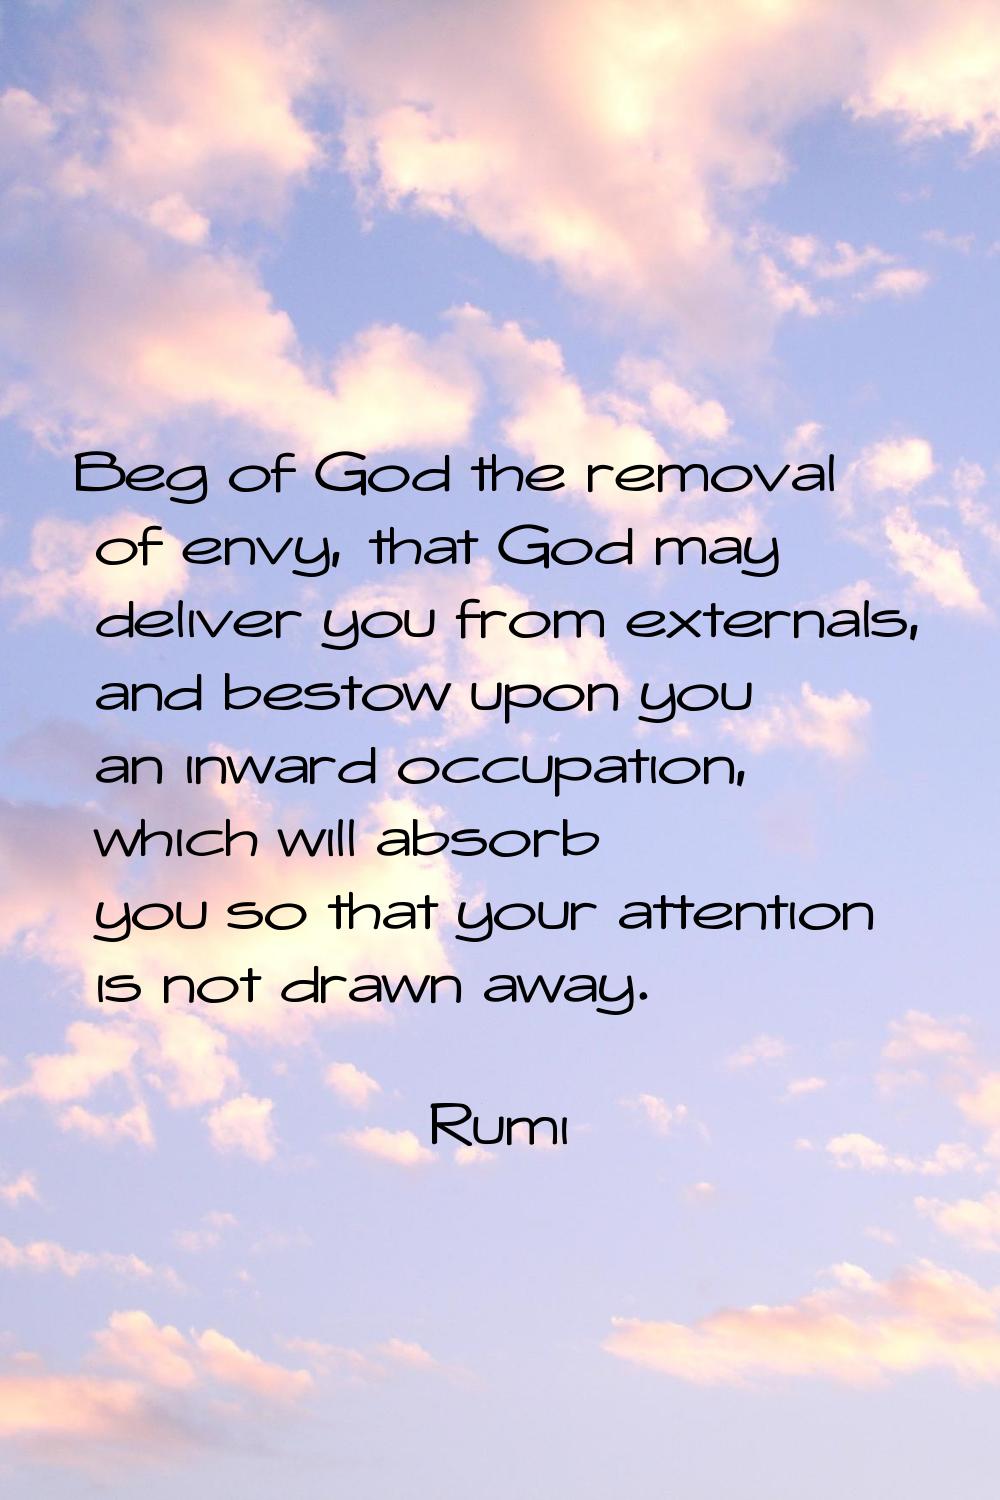 Beg of God the removal of envy, that God may deliver you from externals, and bestow upon you an inw